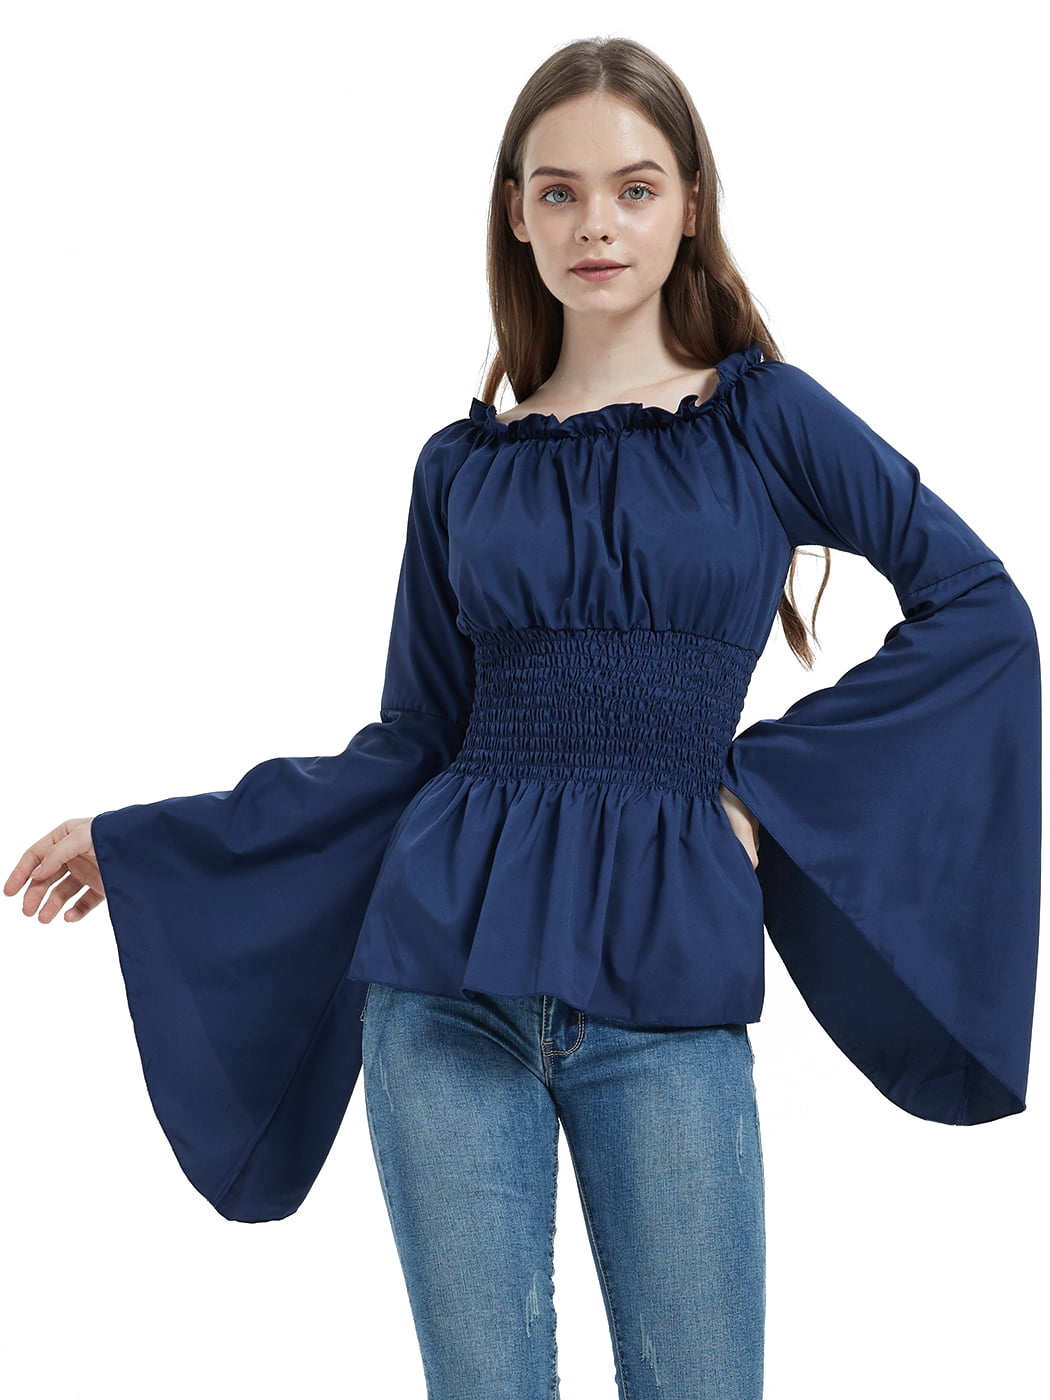 Renaissance Corset Top for Women Flare Long Sleeve Halloween Victorian Gothic Costume Tunic Tee Shirt Blouses Plus Size